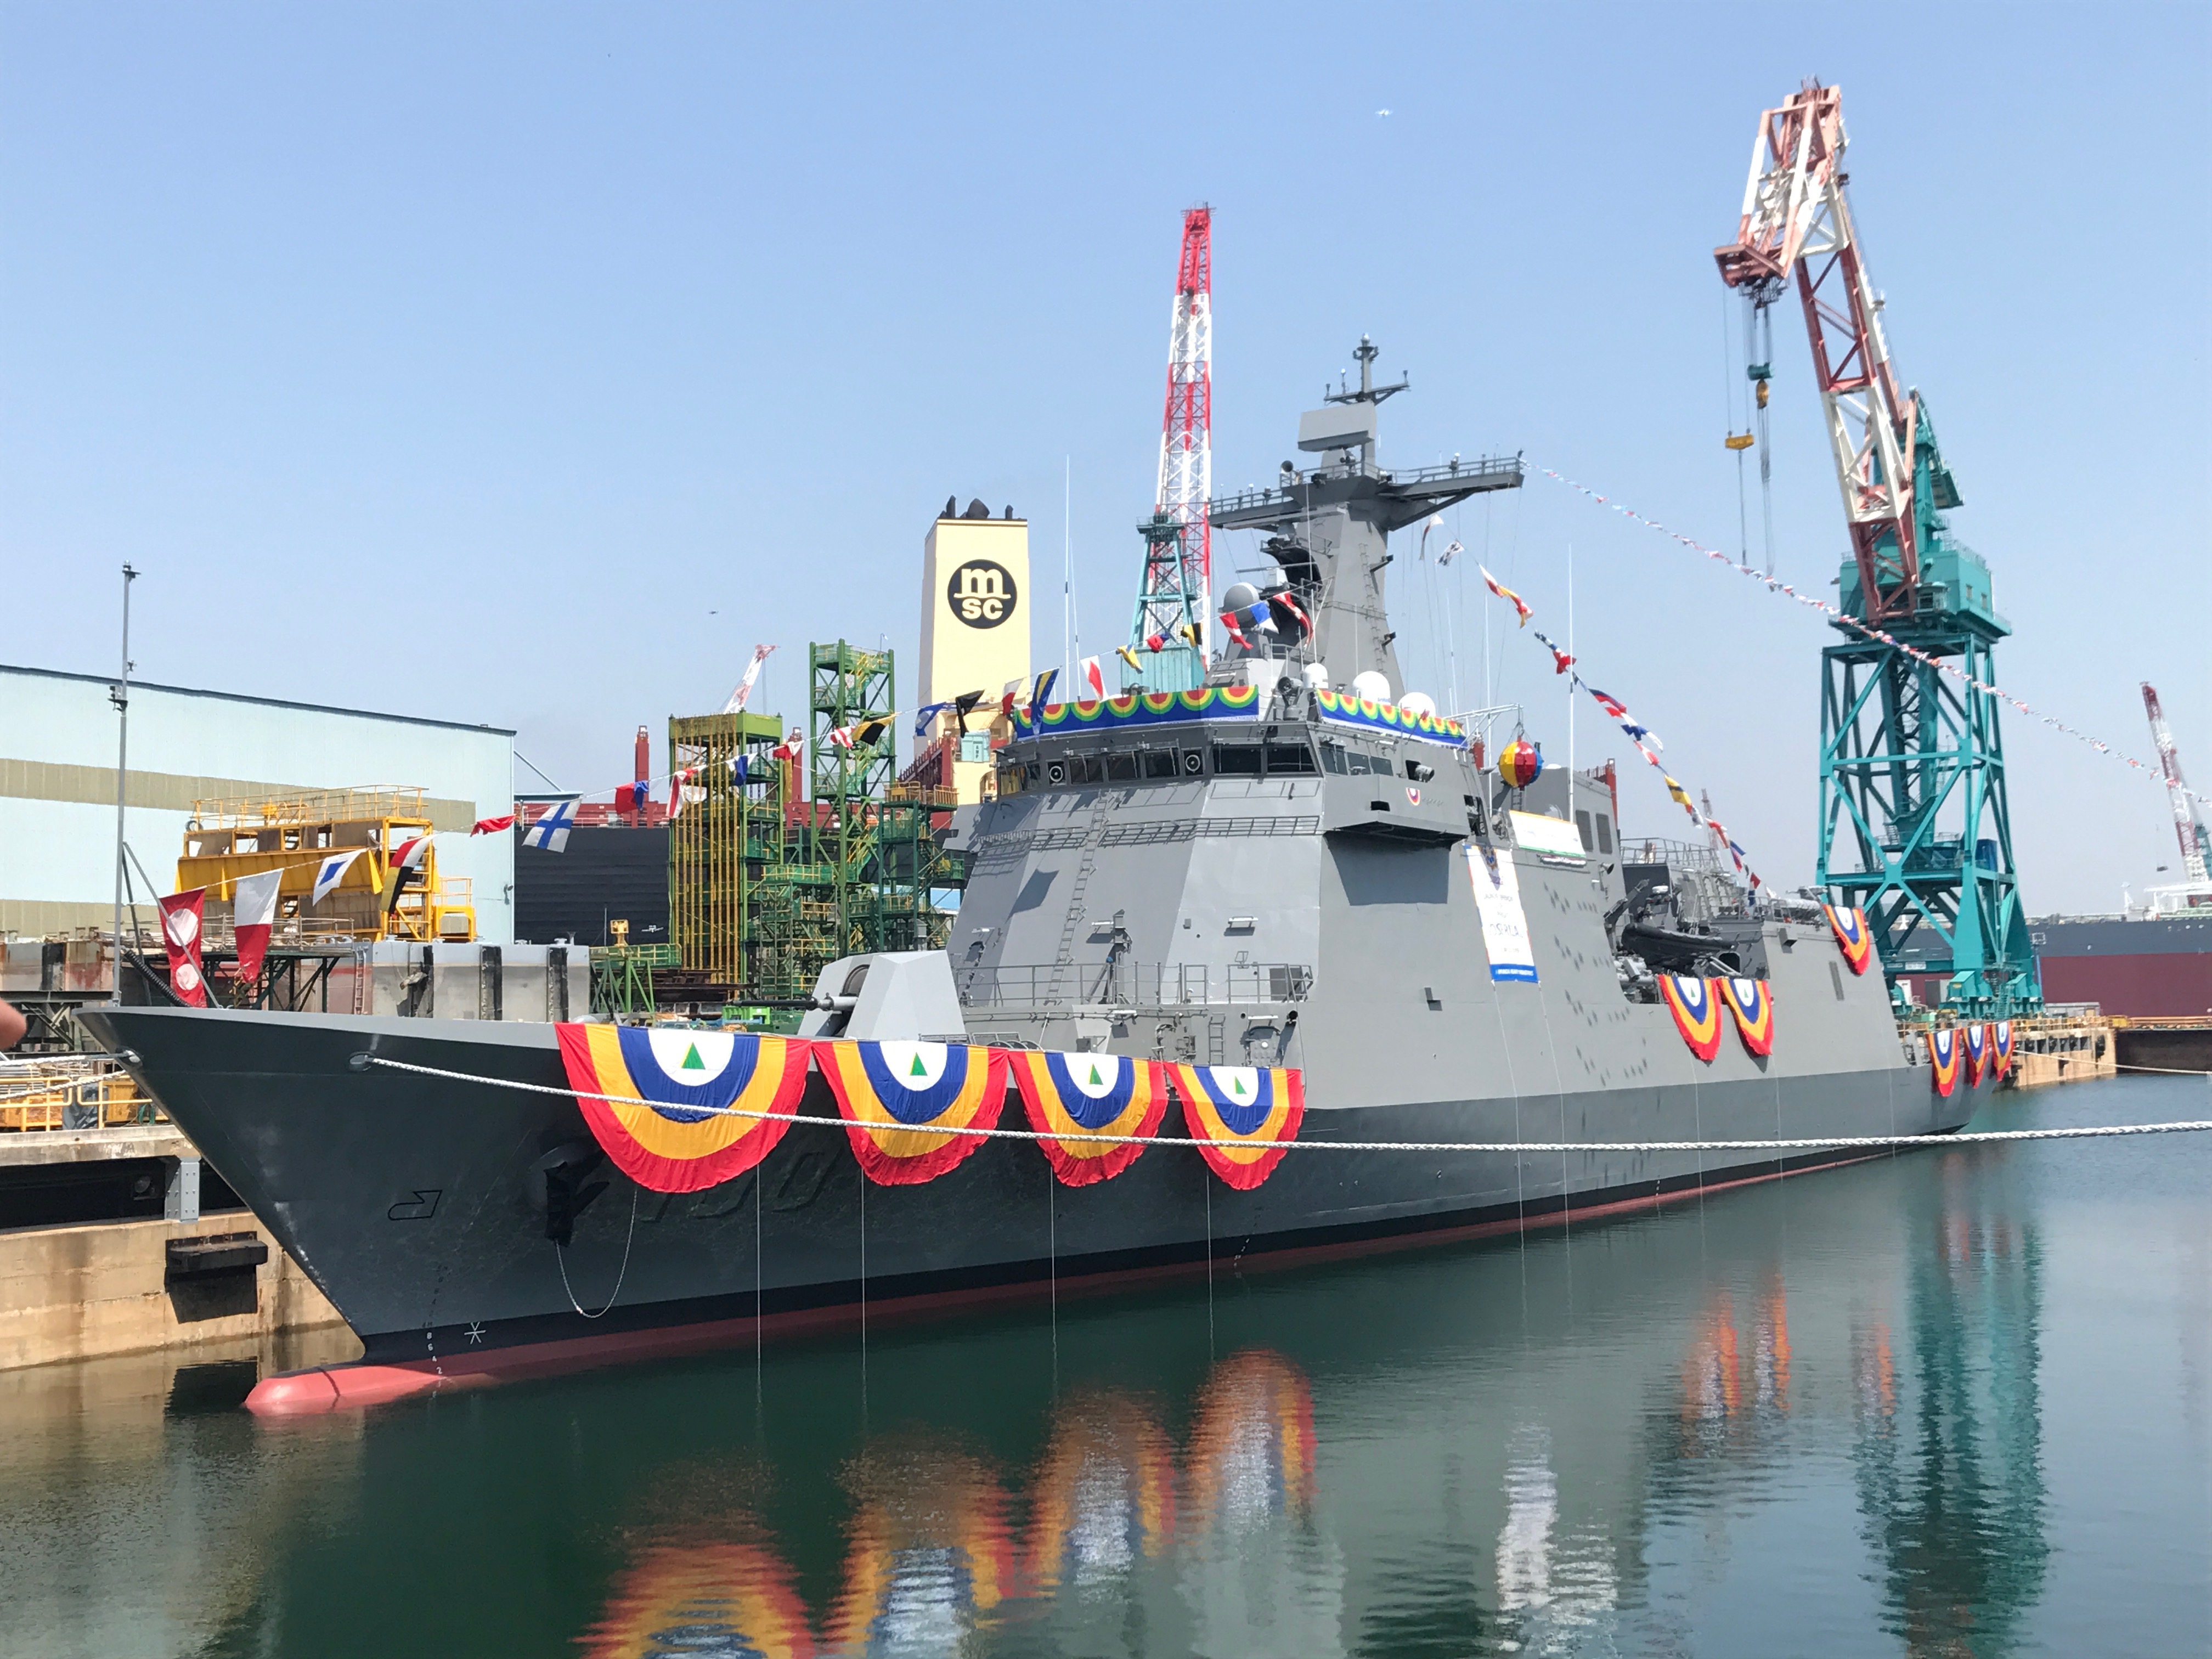 BRP Jose Rizal is the first brand new Philippine Navy ship capable of anti-warfare, anti-surface warfare, anti-submarine warfare and electronic warfare operations. / FRANCES MANGOSING